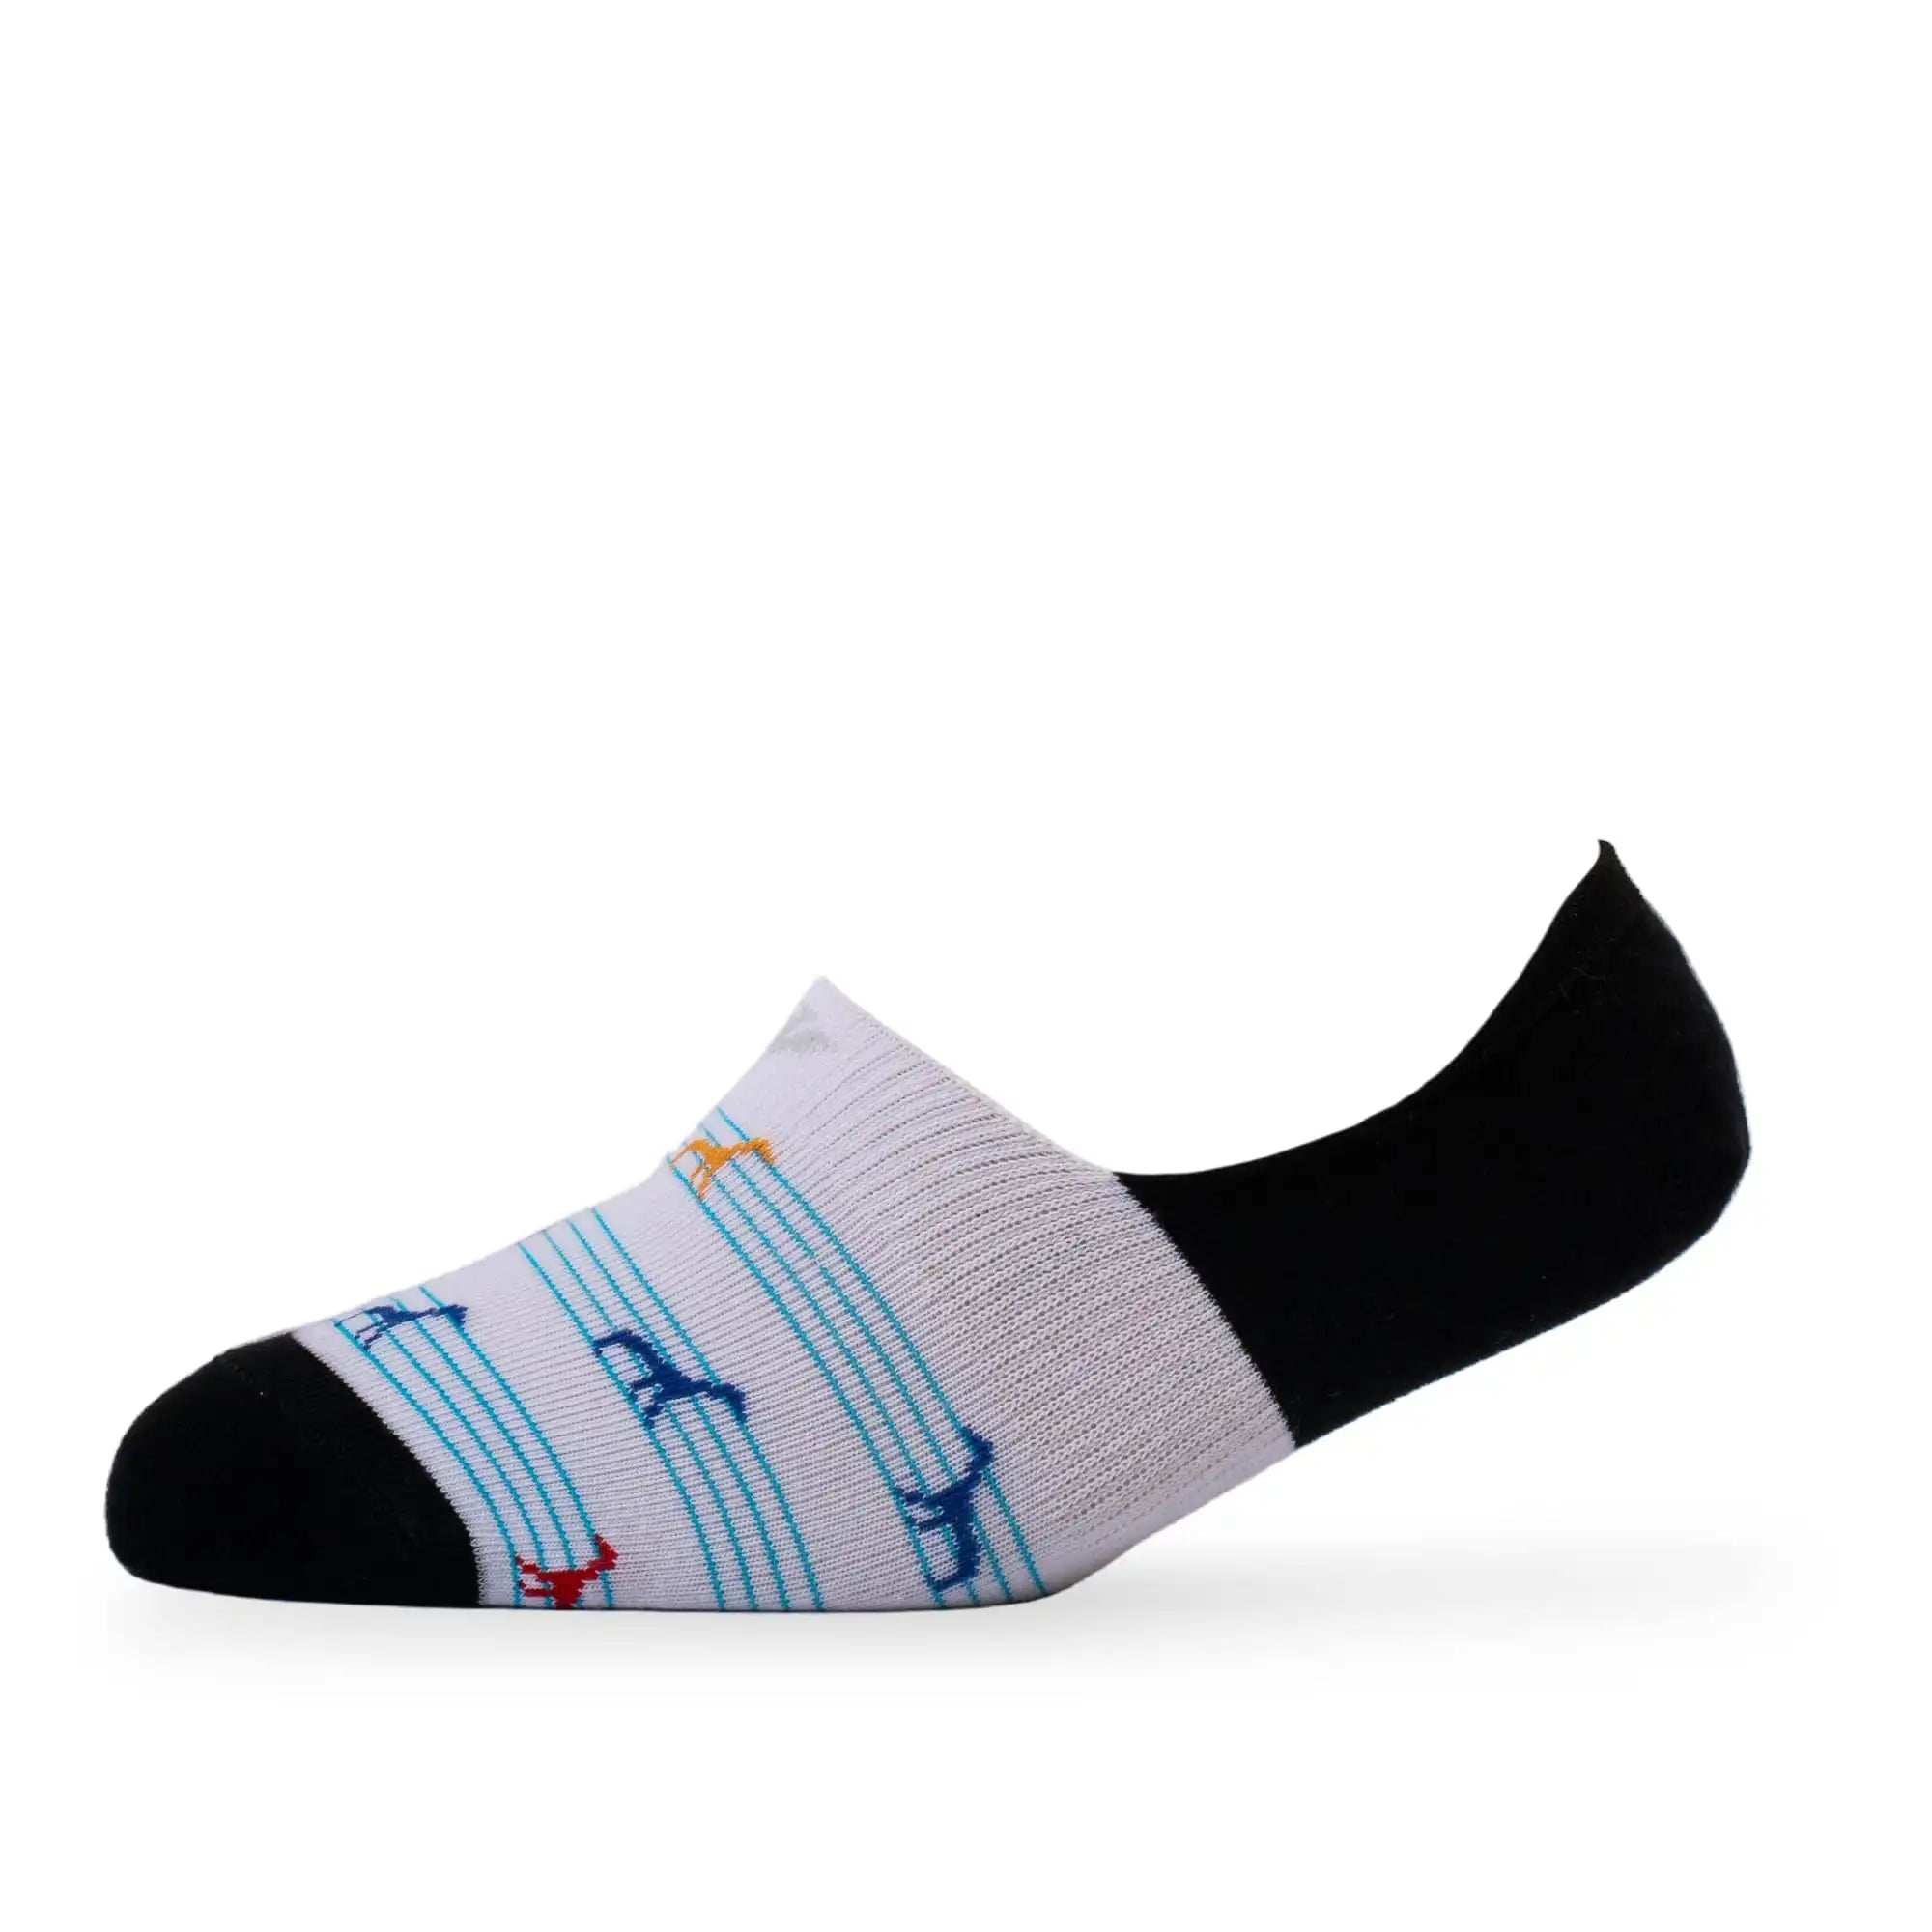 Young Wings Men's_Socks Multi Colour Cotton Fabric Design Free Size Low Ankle Length Casual & Formal Wear Socks - Pack of 5, Style no. 1713-M1